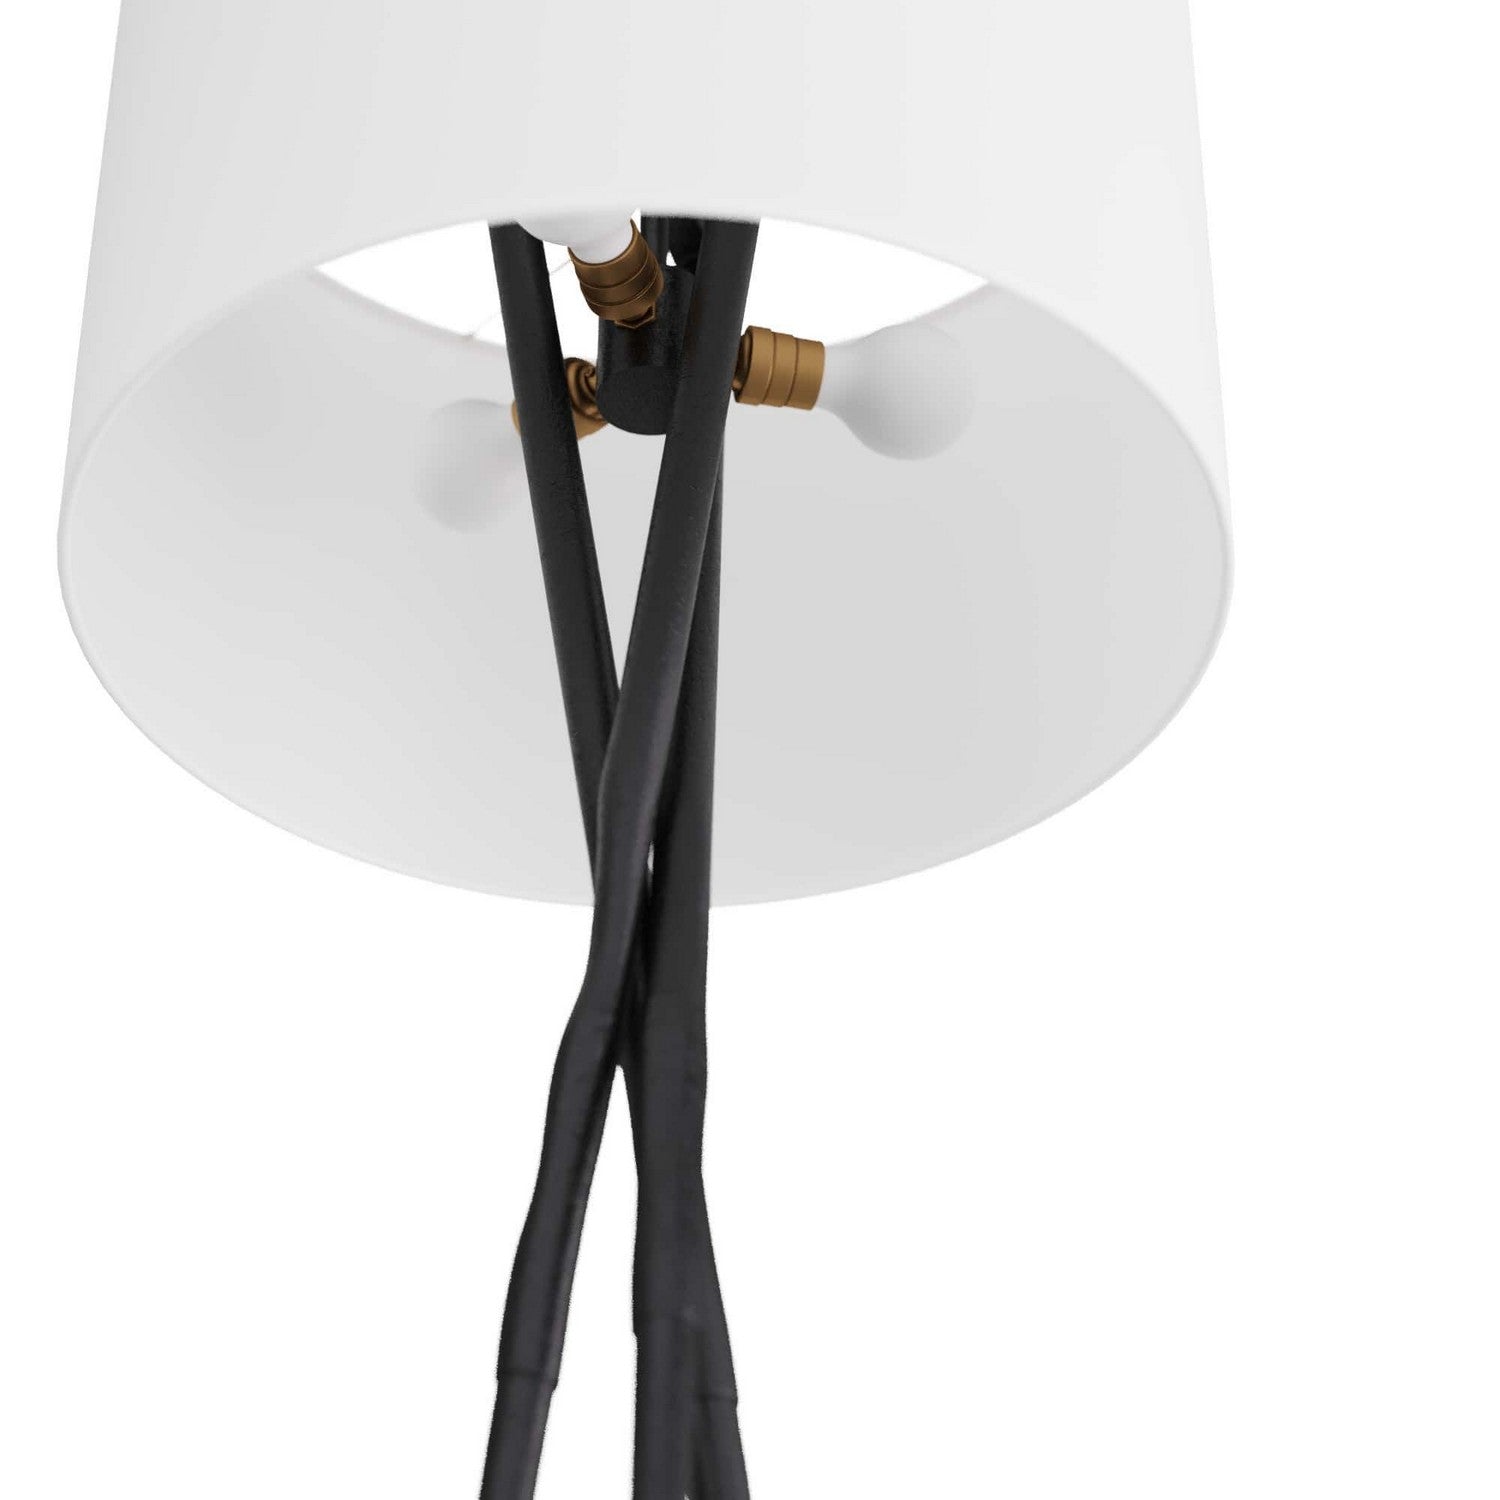 One Light Floor Lamp from the Shepherd's collection in Blackened Bronze finish